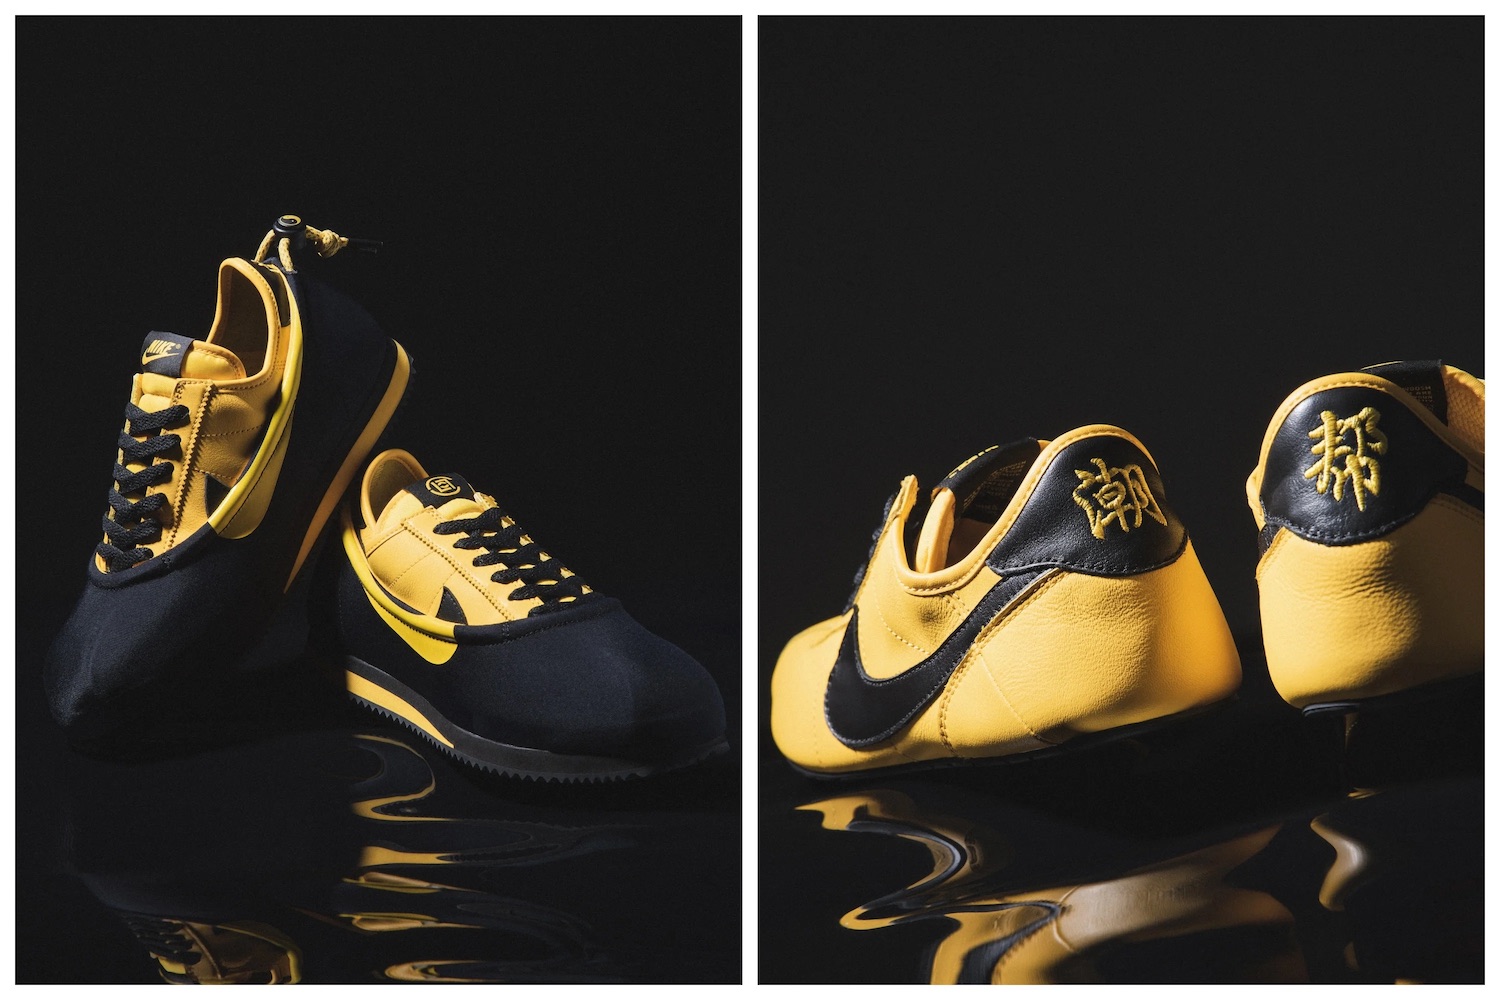 two shots of the CLOT x Nike Cortex "CLOTEZ" on a black background